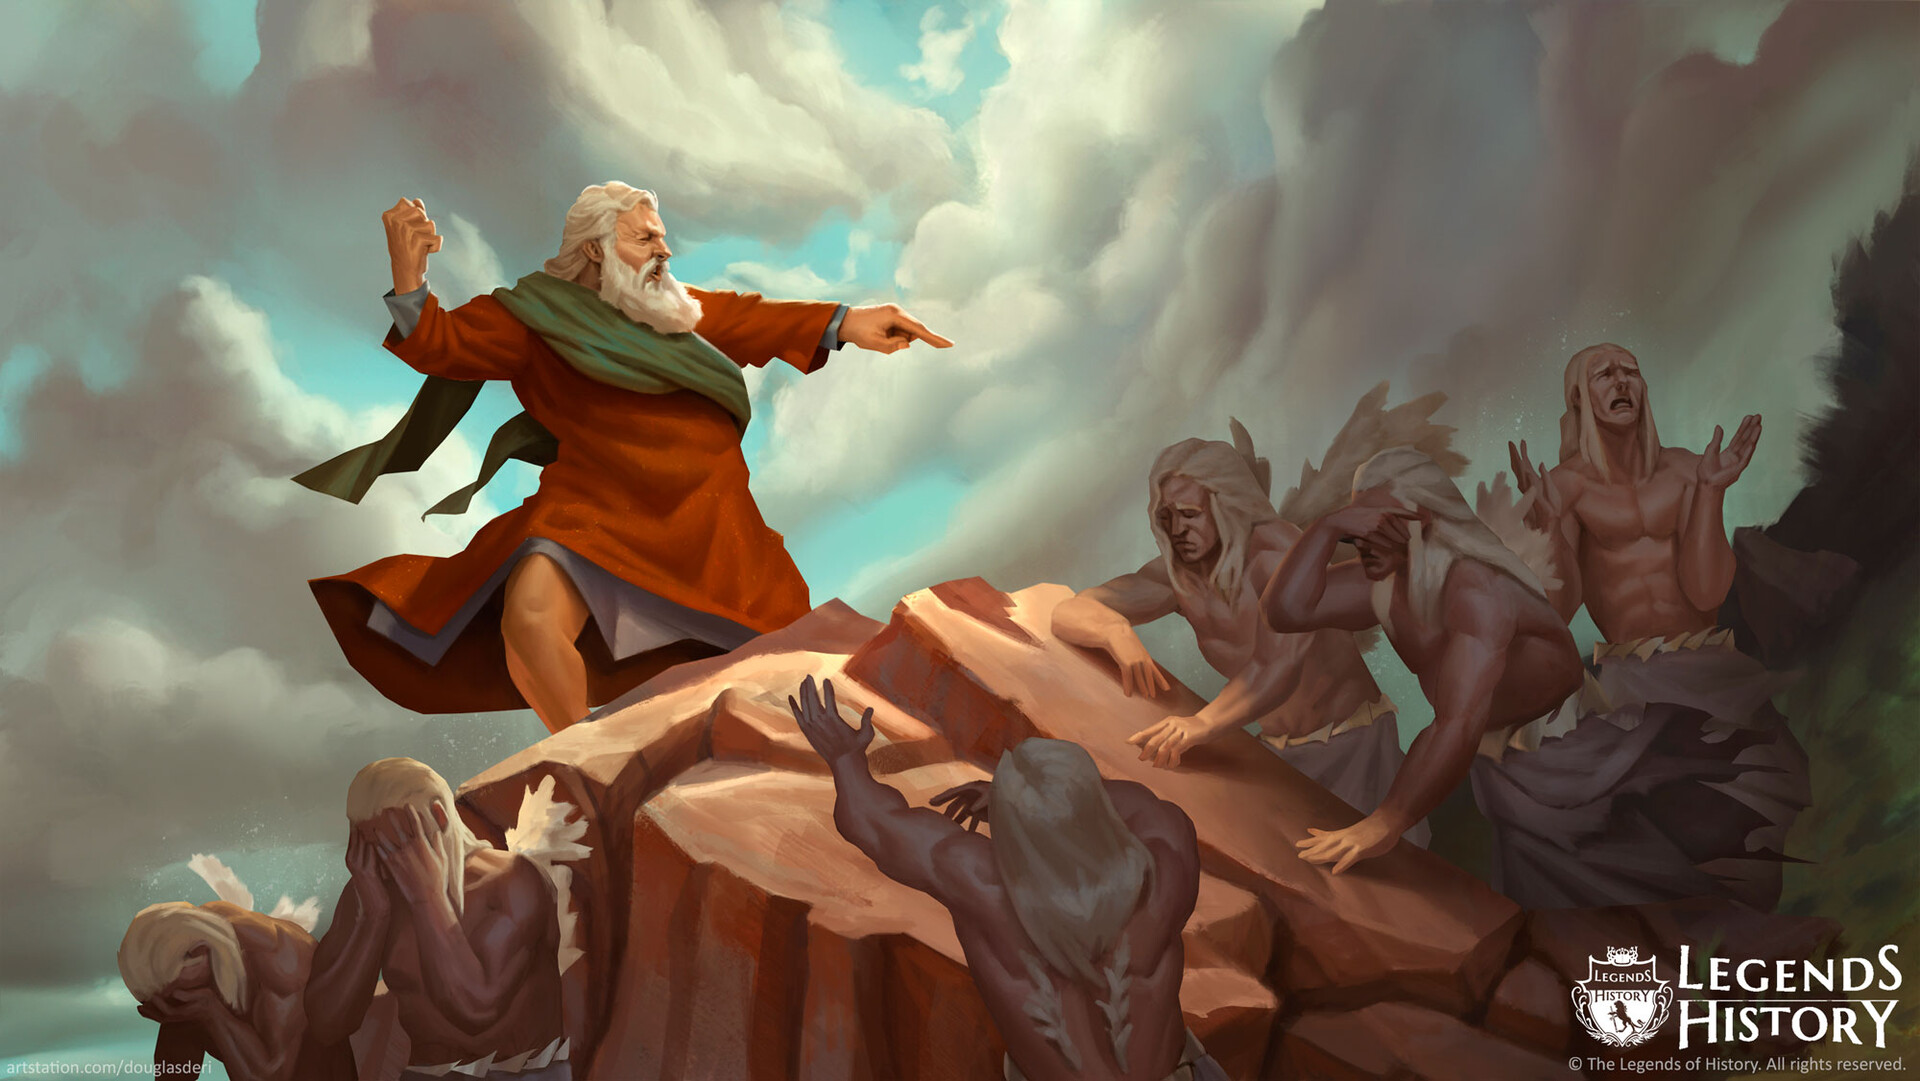 ArtStation - Enoch Scolding the Watchers - The Legends Of History